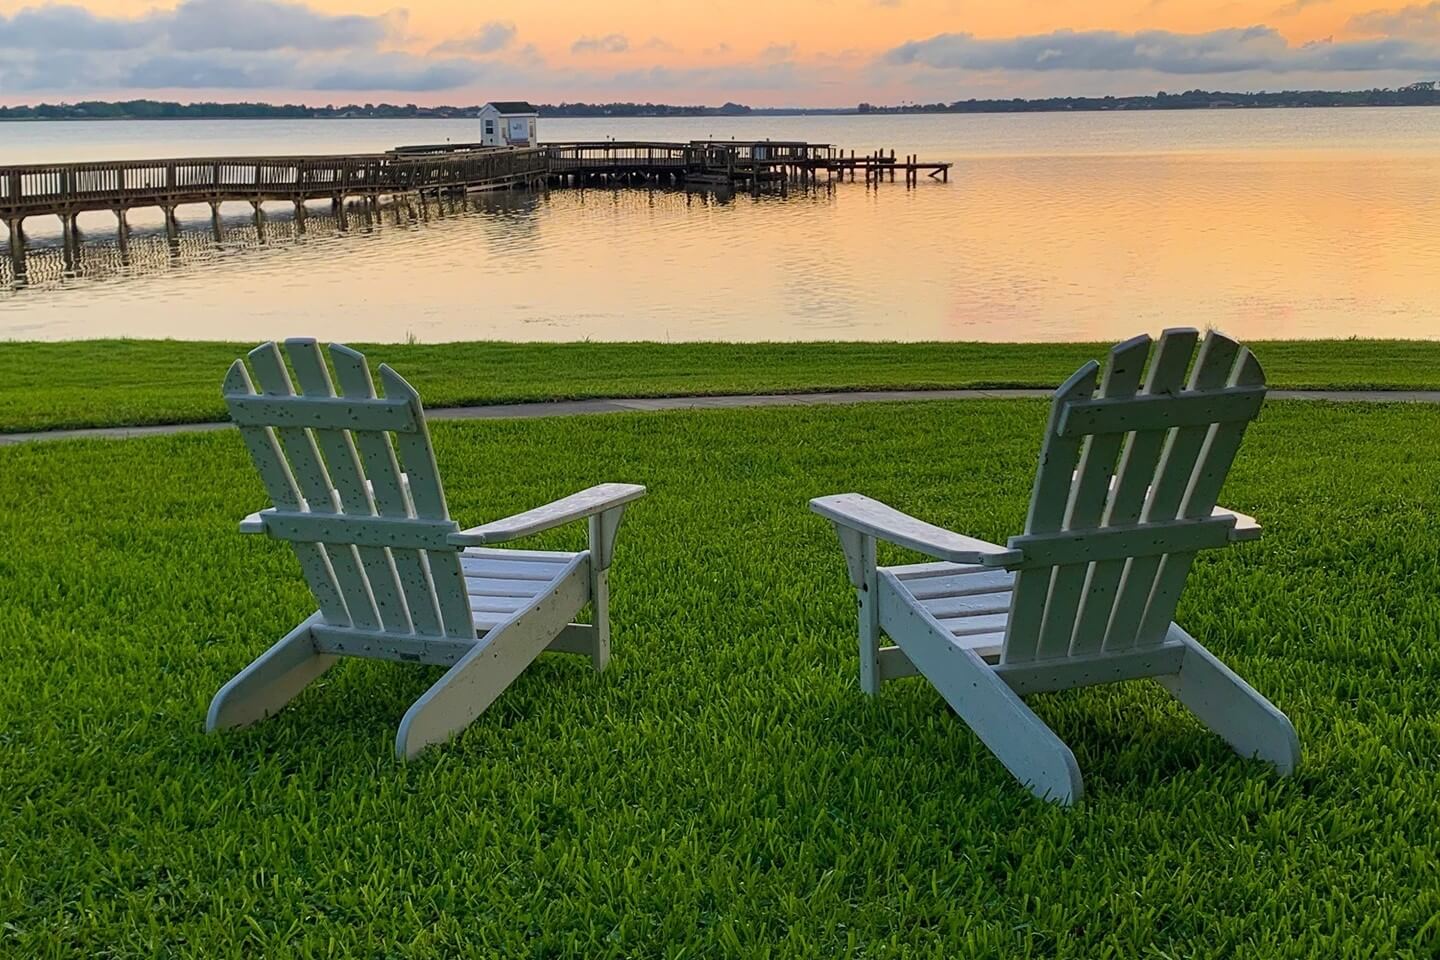 Two chairs sit on the lawn and overlook Lake Dora.